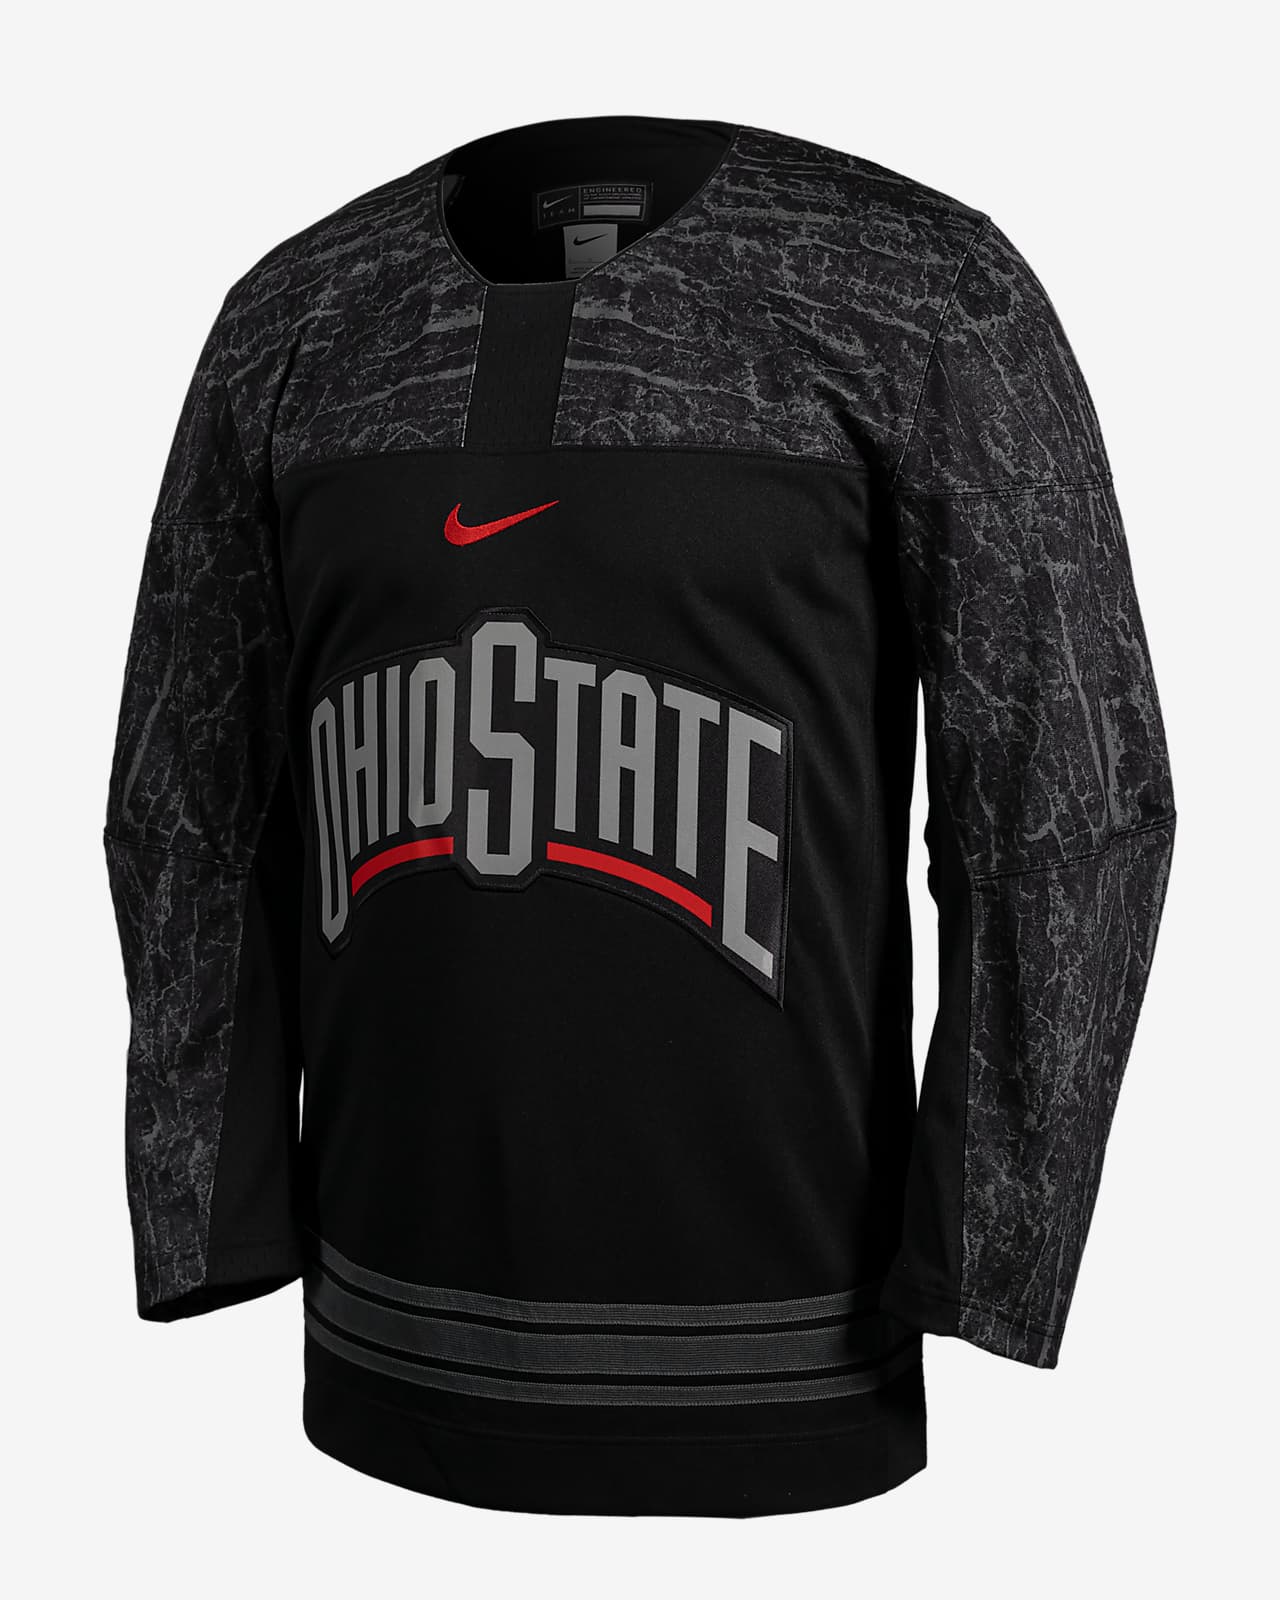 Best Ohio State Buckeyes gifts and gear: Ohio St jerseys, shirts, hats